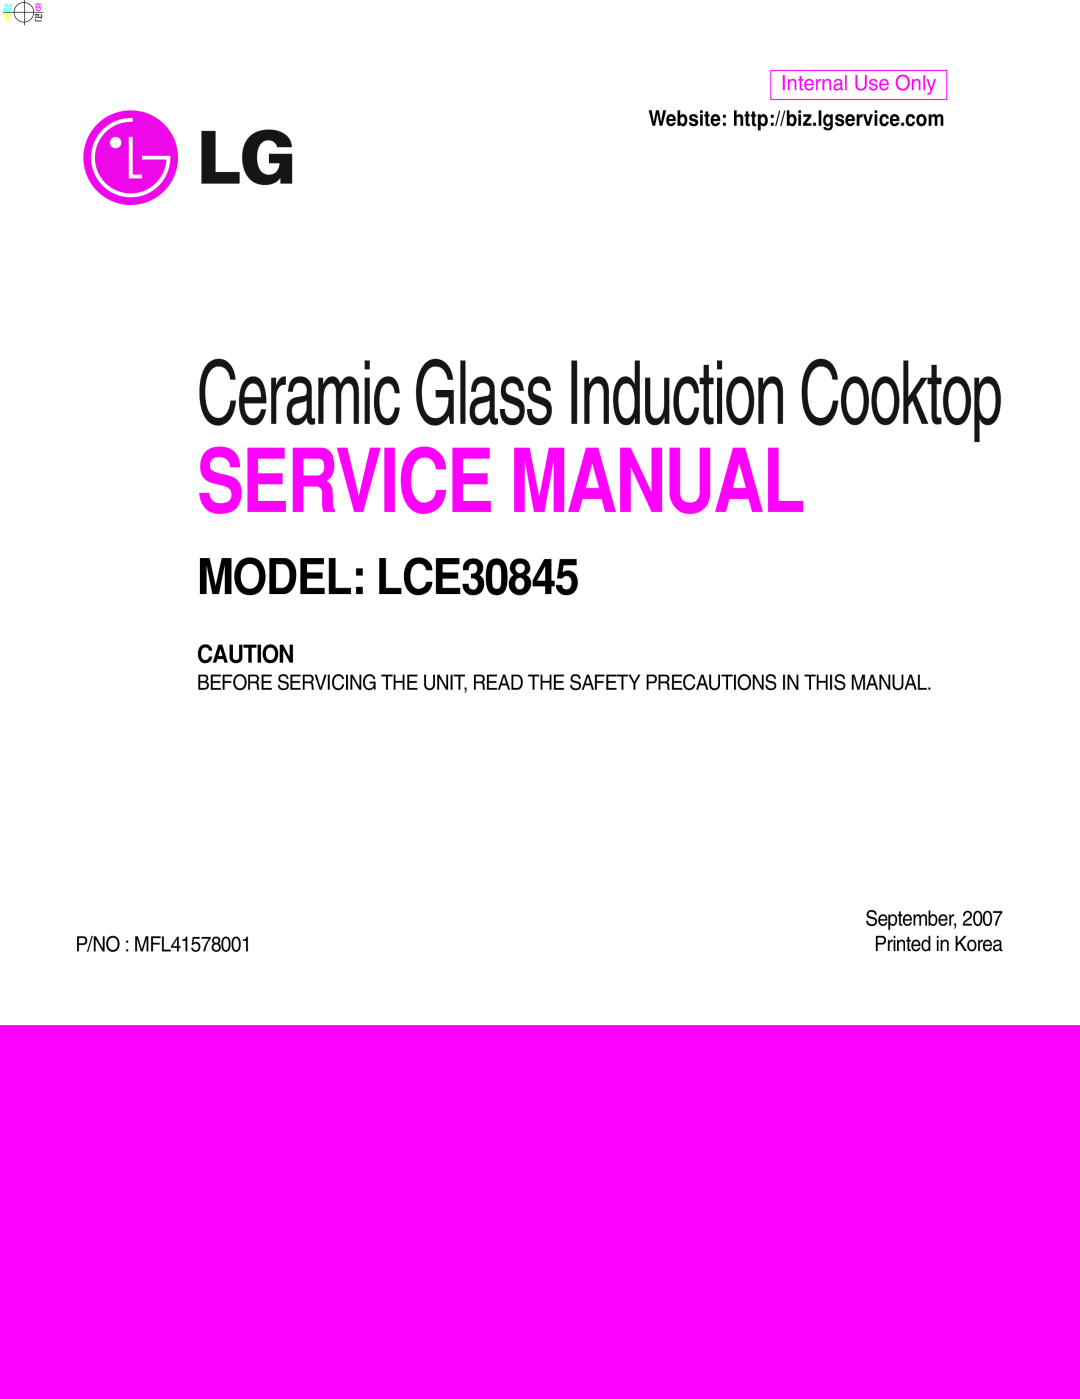 LG Electronics service manual Ceramic Glass Induction Cooktop, MODEL LCE30845, Internal Use Only 